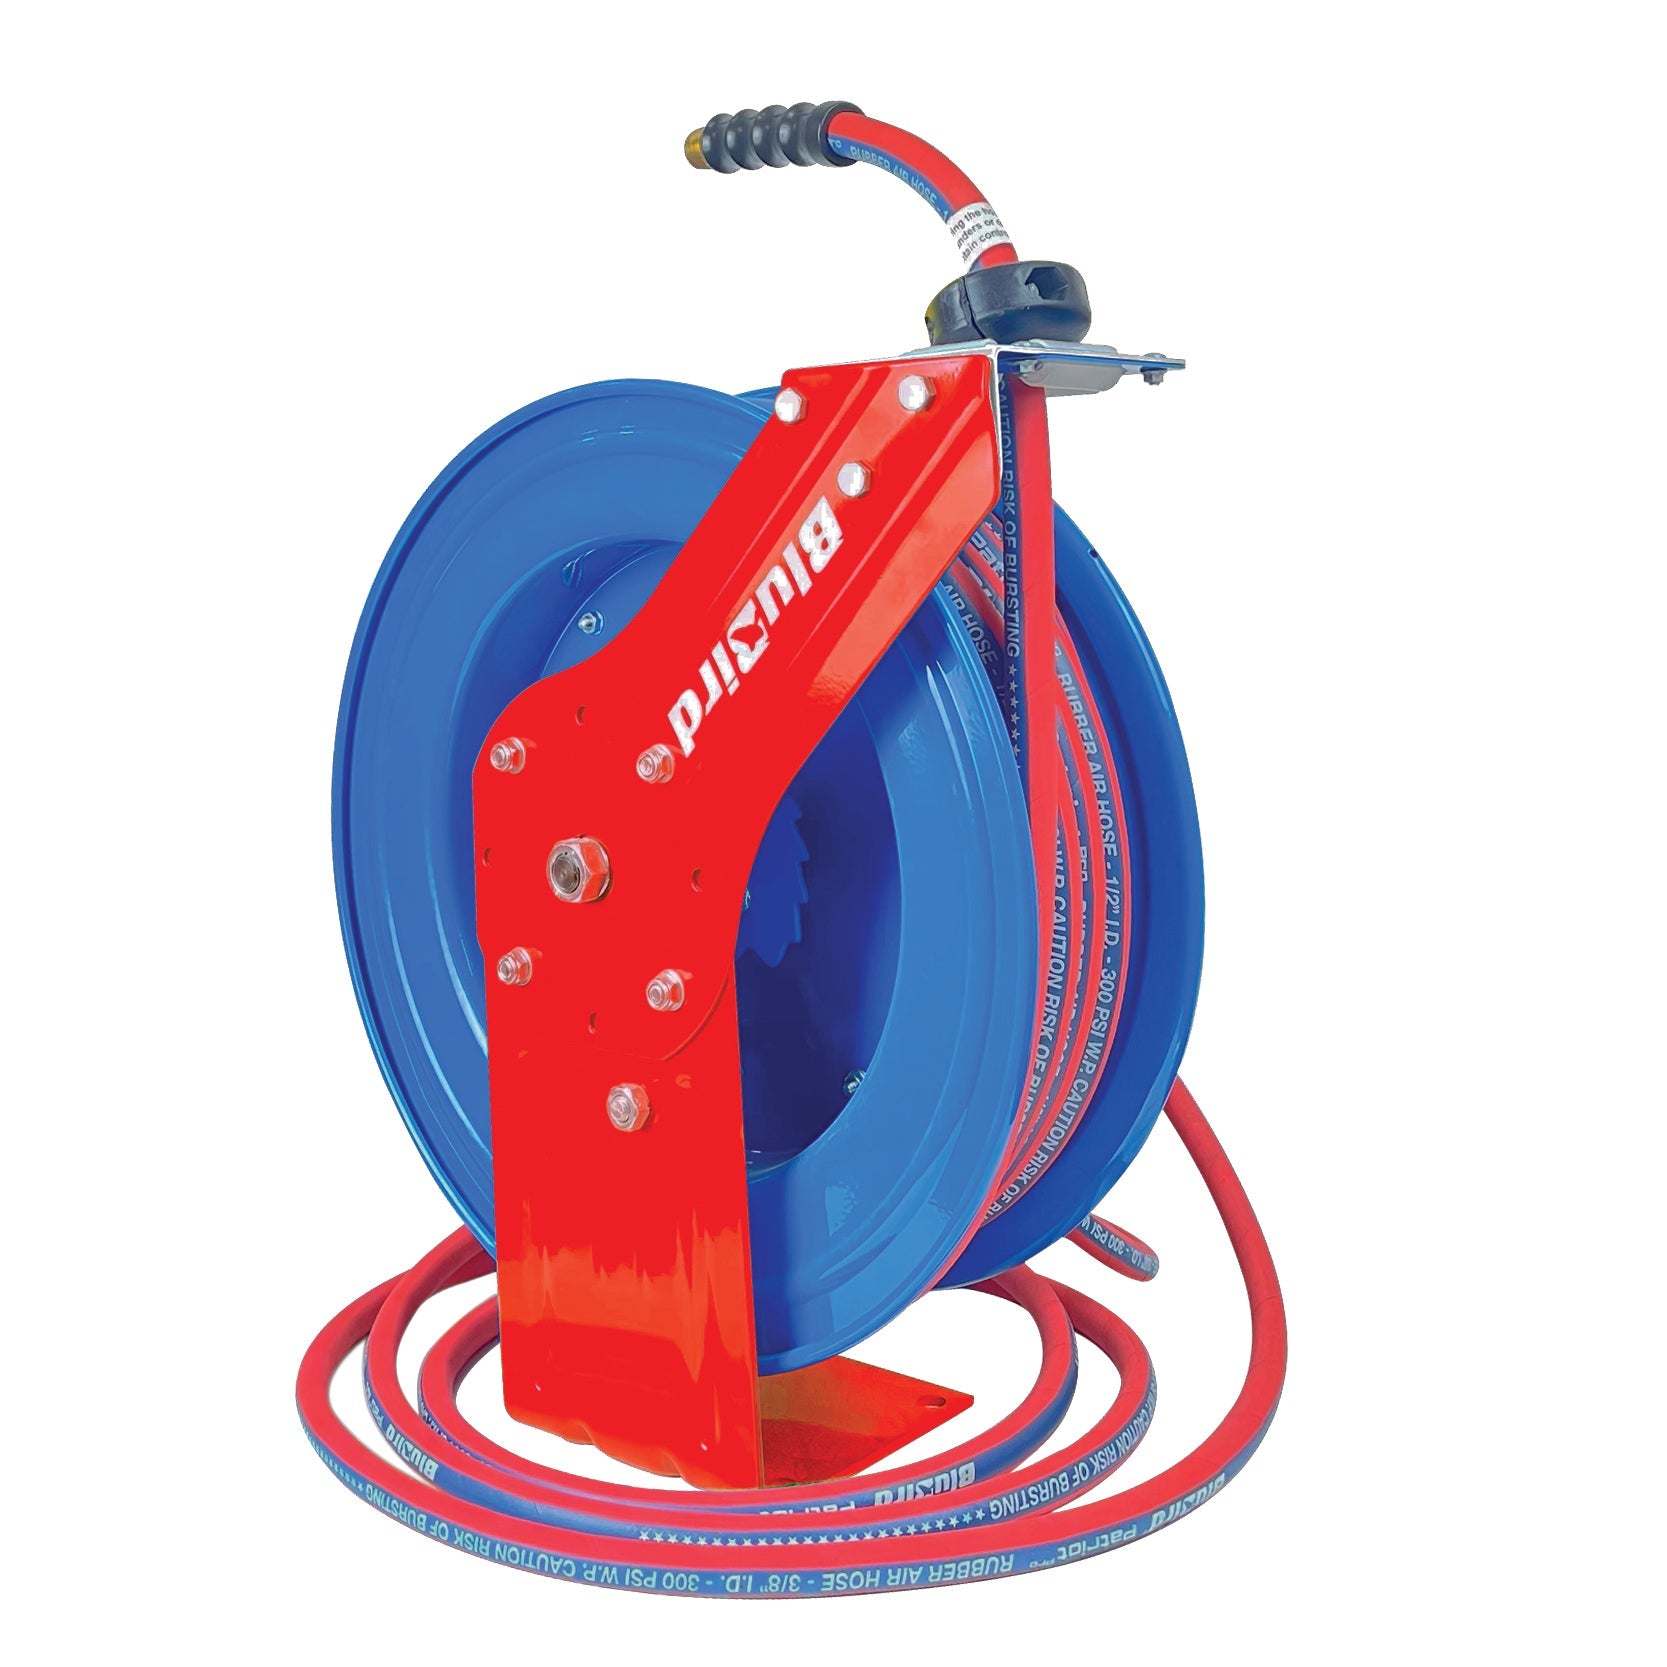 BluBird Patriot Pro Air Hose Reel 1/2" x 50' Retractable Heavy Duty Steel Construction with Rubber Hose 300 PSI